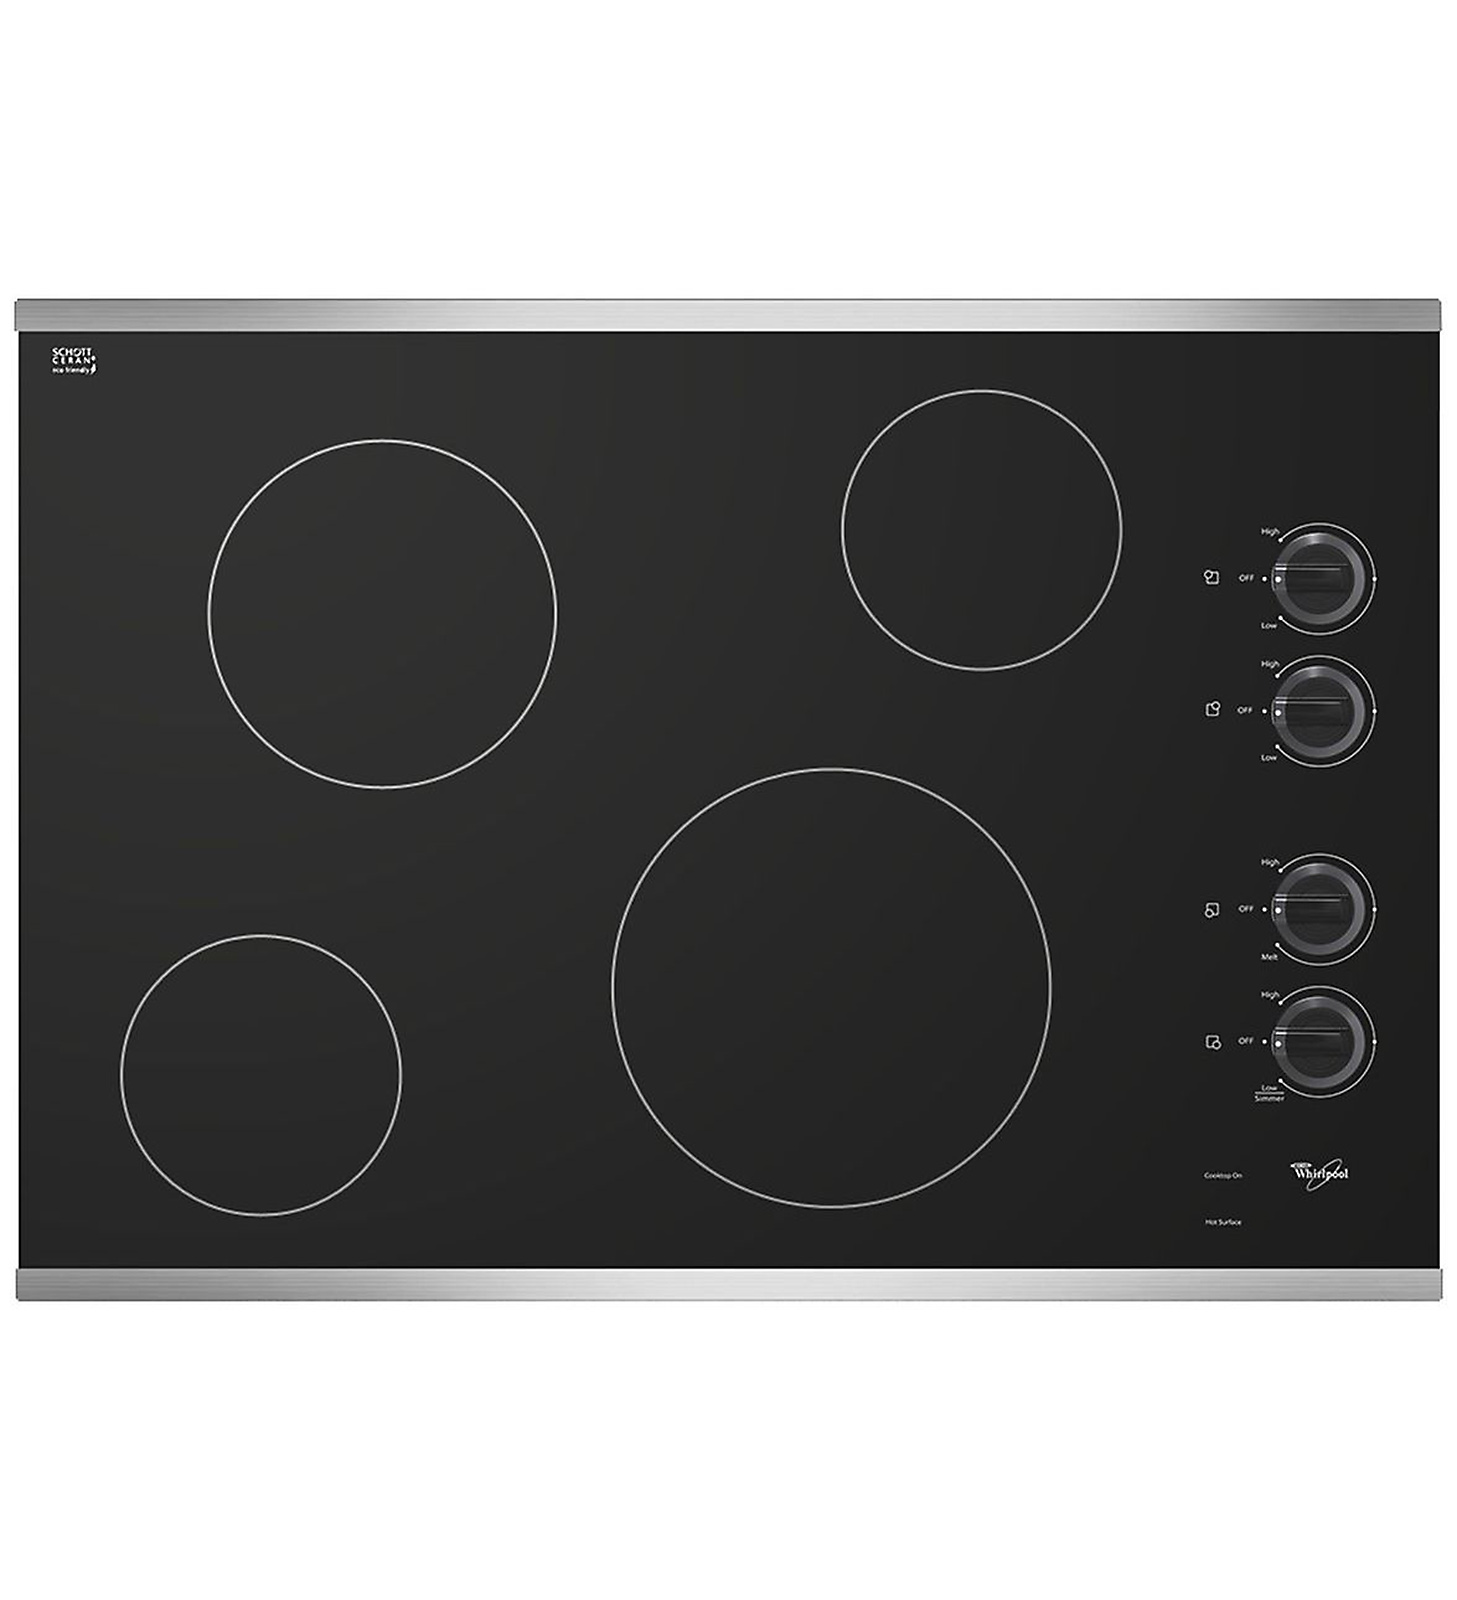 UPC 883049225449 product image for Whirlpool 30